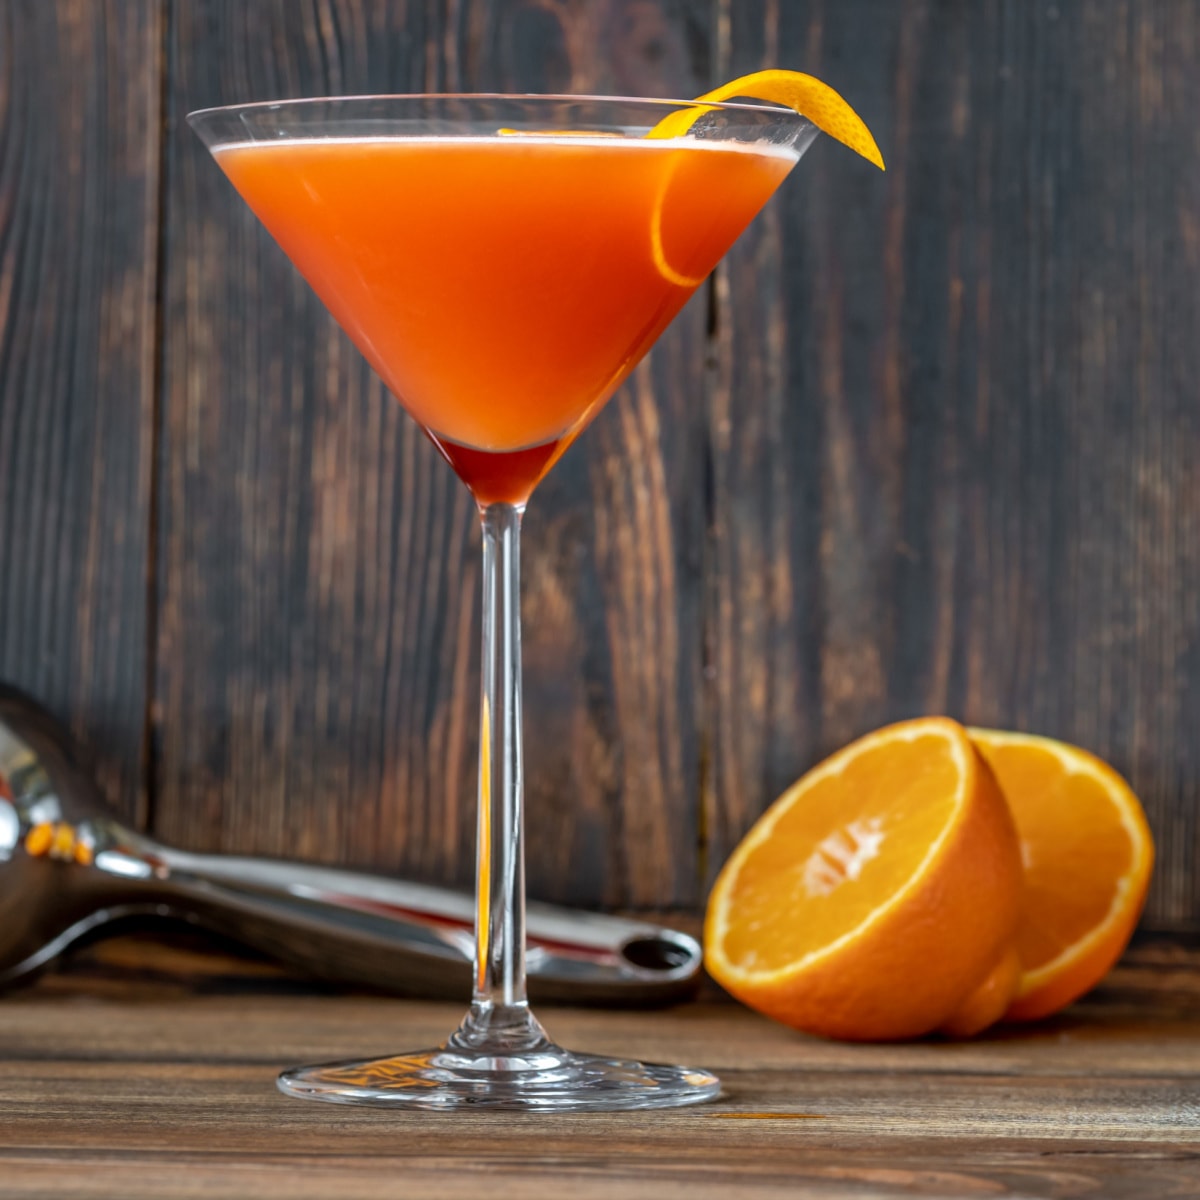 A martini glass with blood and sand cocktail garnished with orange peel beside an orange sliced in half on top of a wooden table.